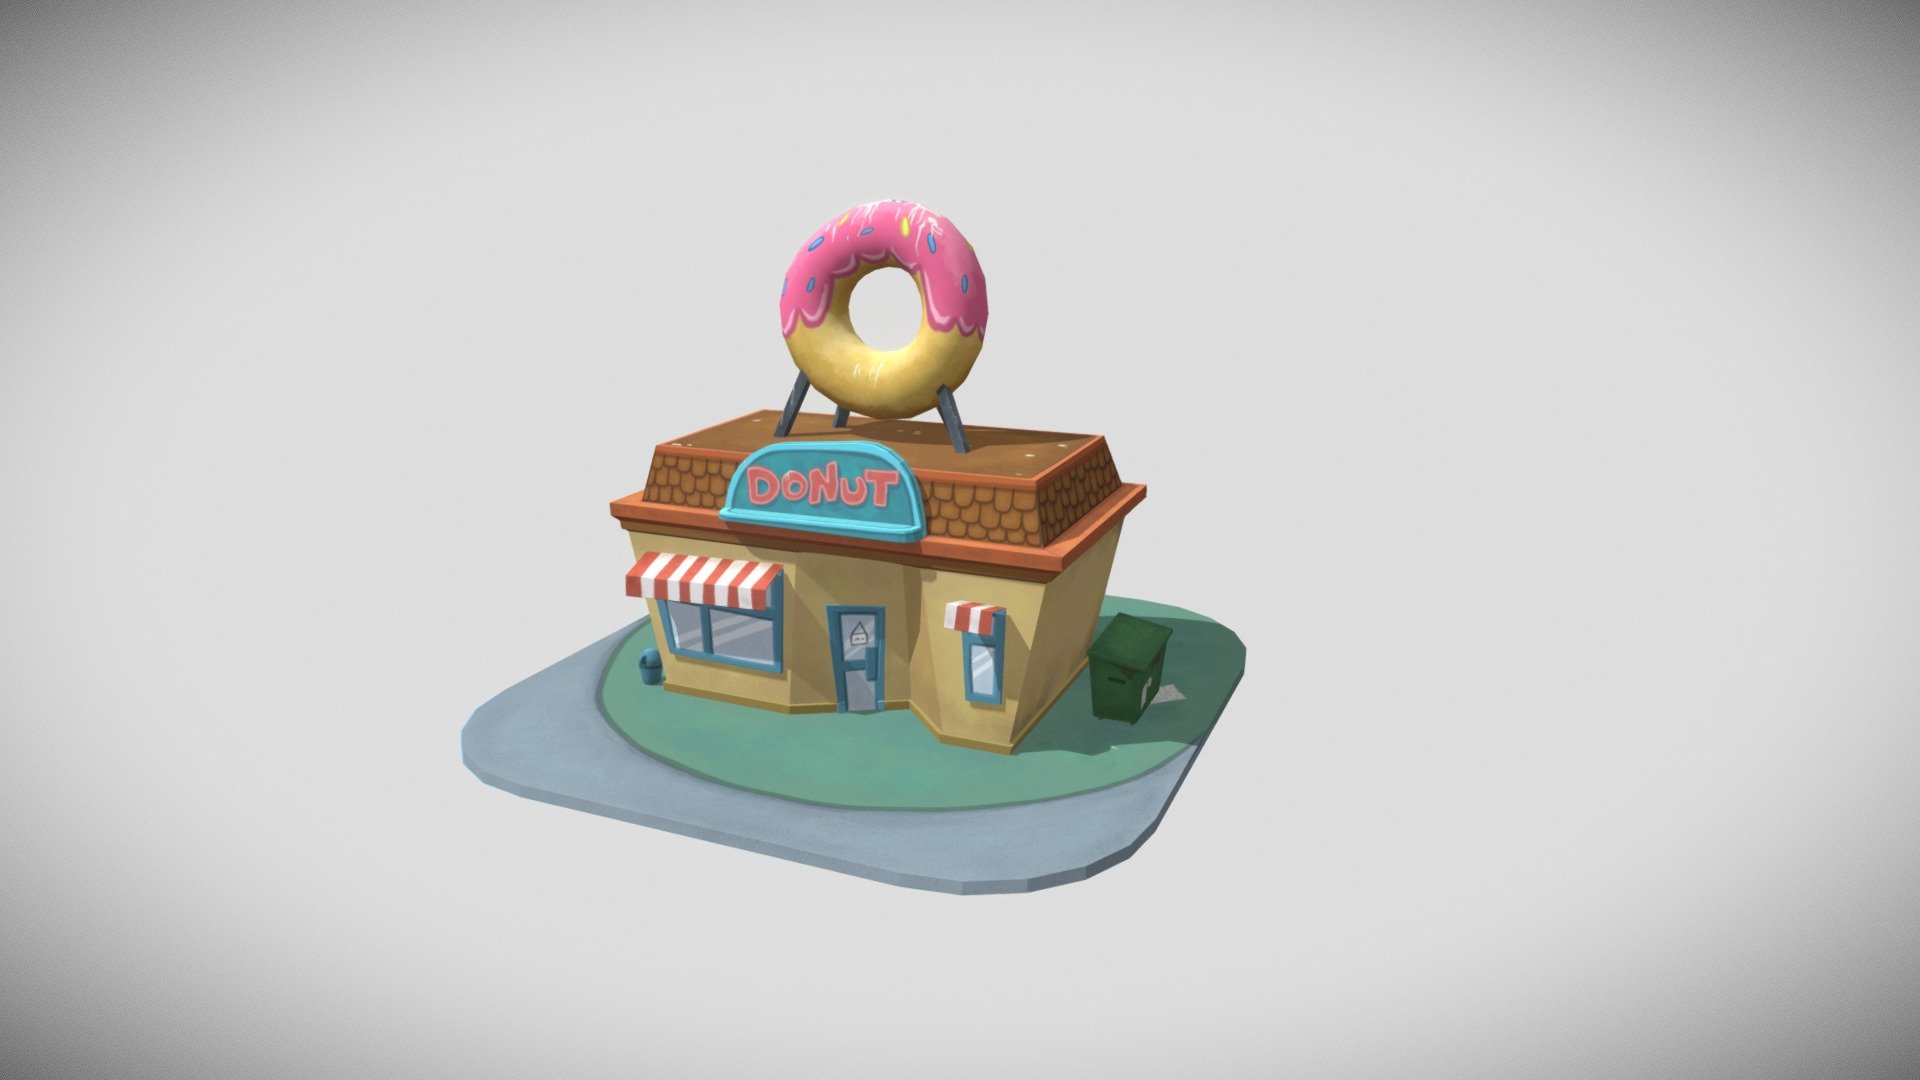 This is a little donut shop I modeled in Blender and handpainted in Substance Painter. 

It is based on a concept made by the artist Young-Ji Cha 3d model